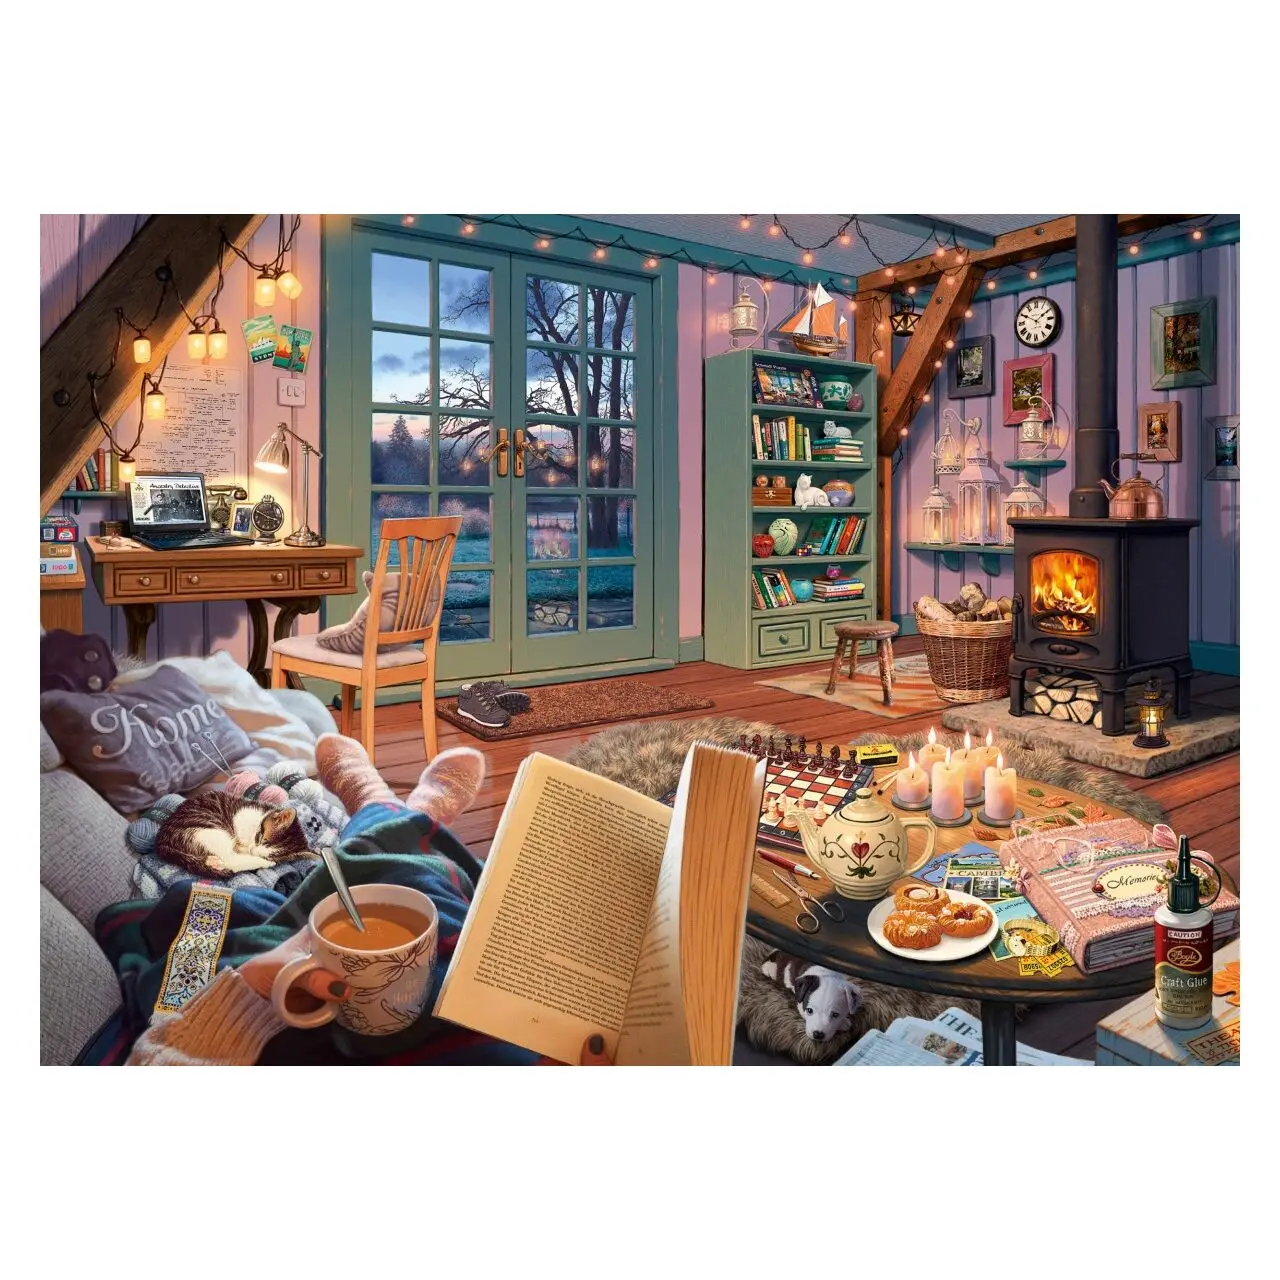 Teile 1000 Puzzle The At Holiday Home